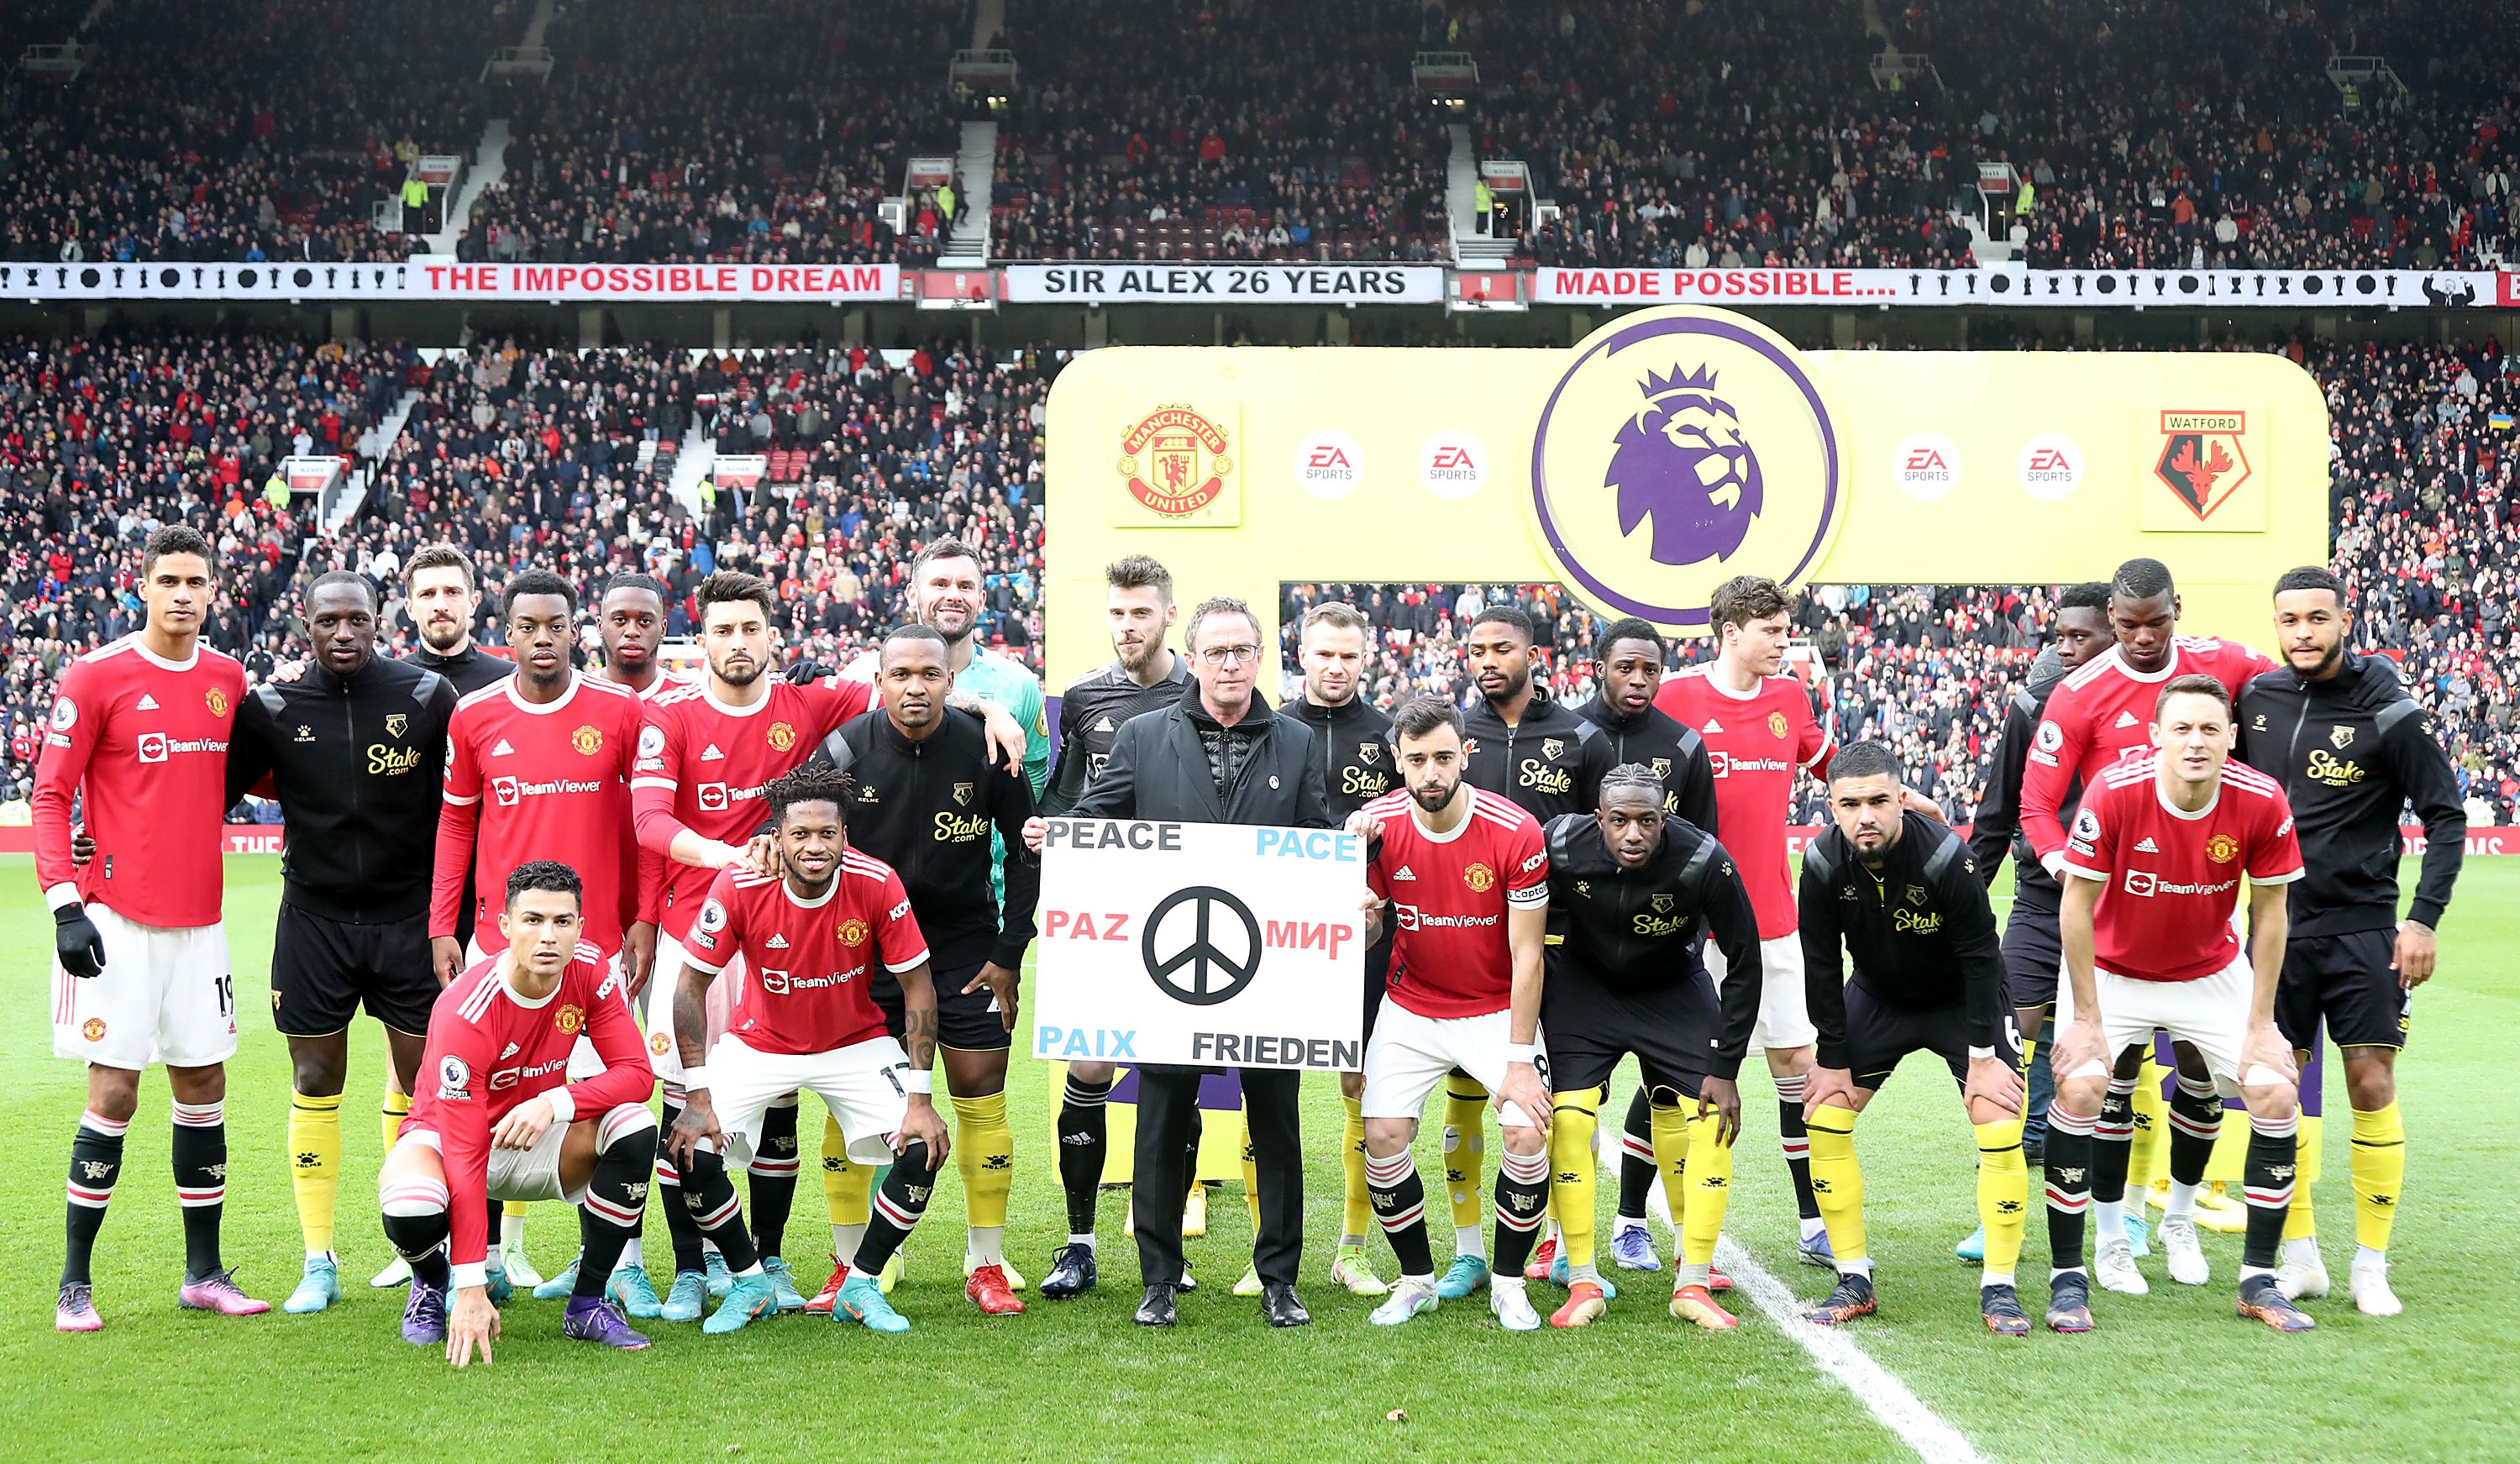 Both teams pose behind a sign reading Peace in several languages ahead of the Premier League match between Manchester United and Watford.